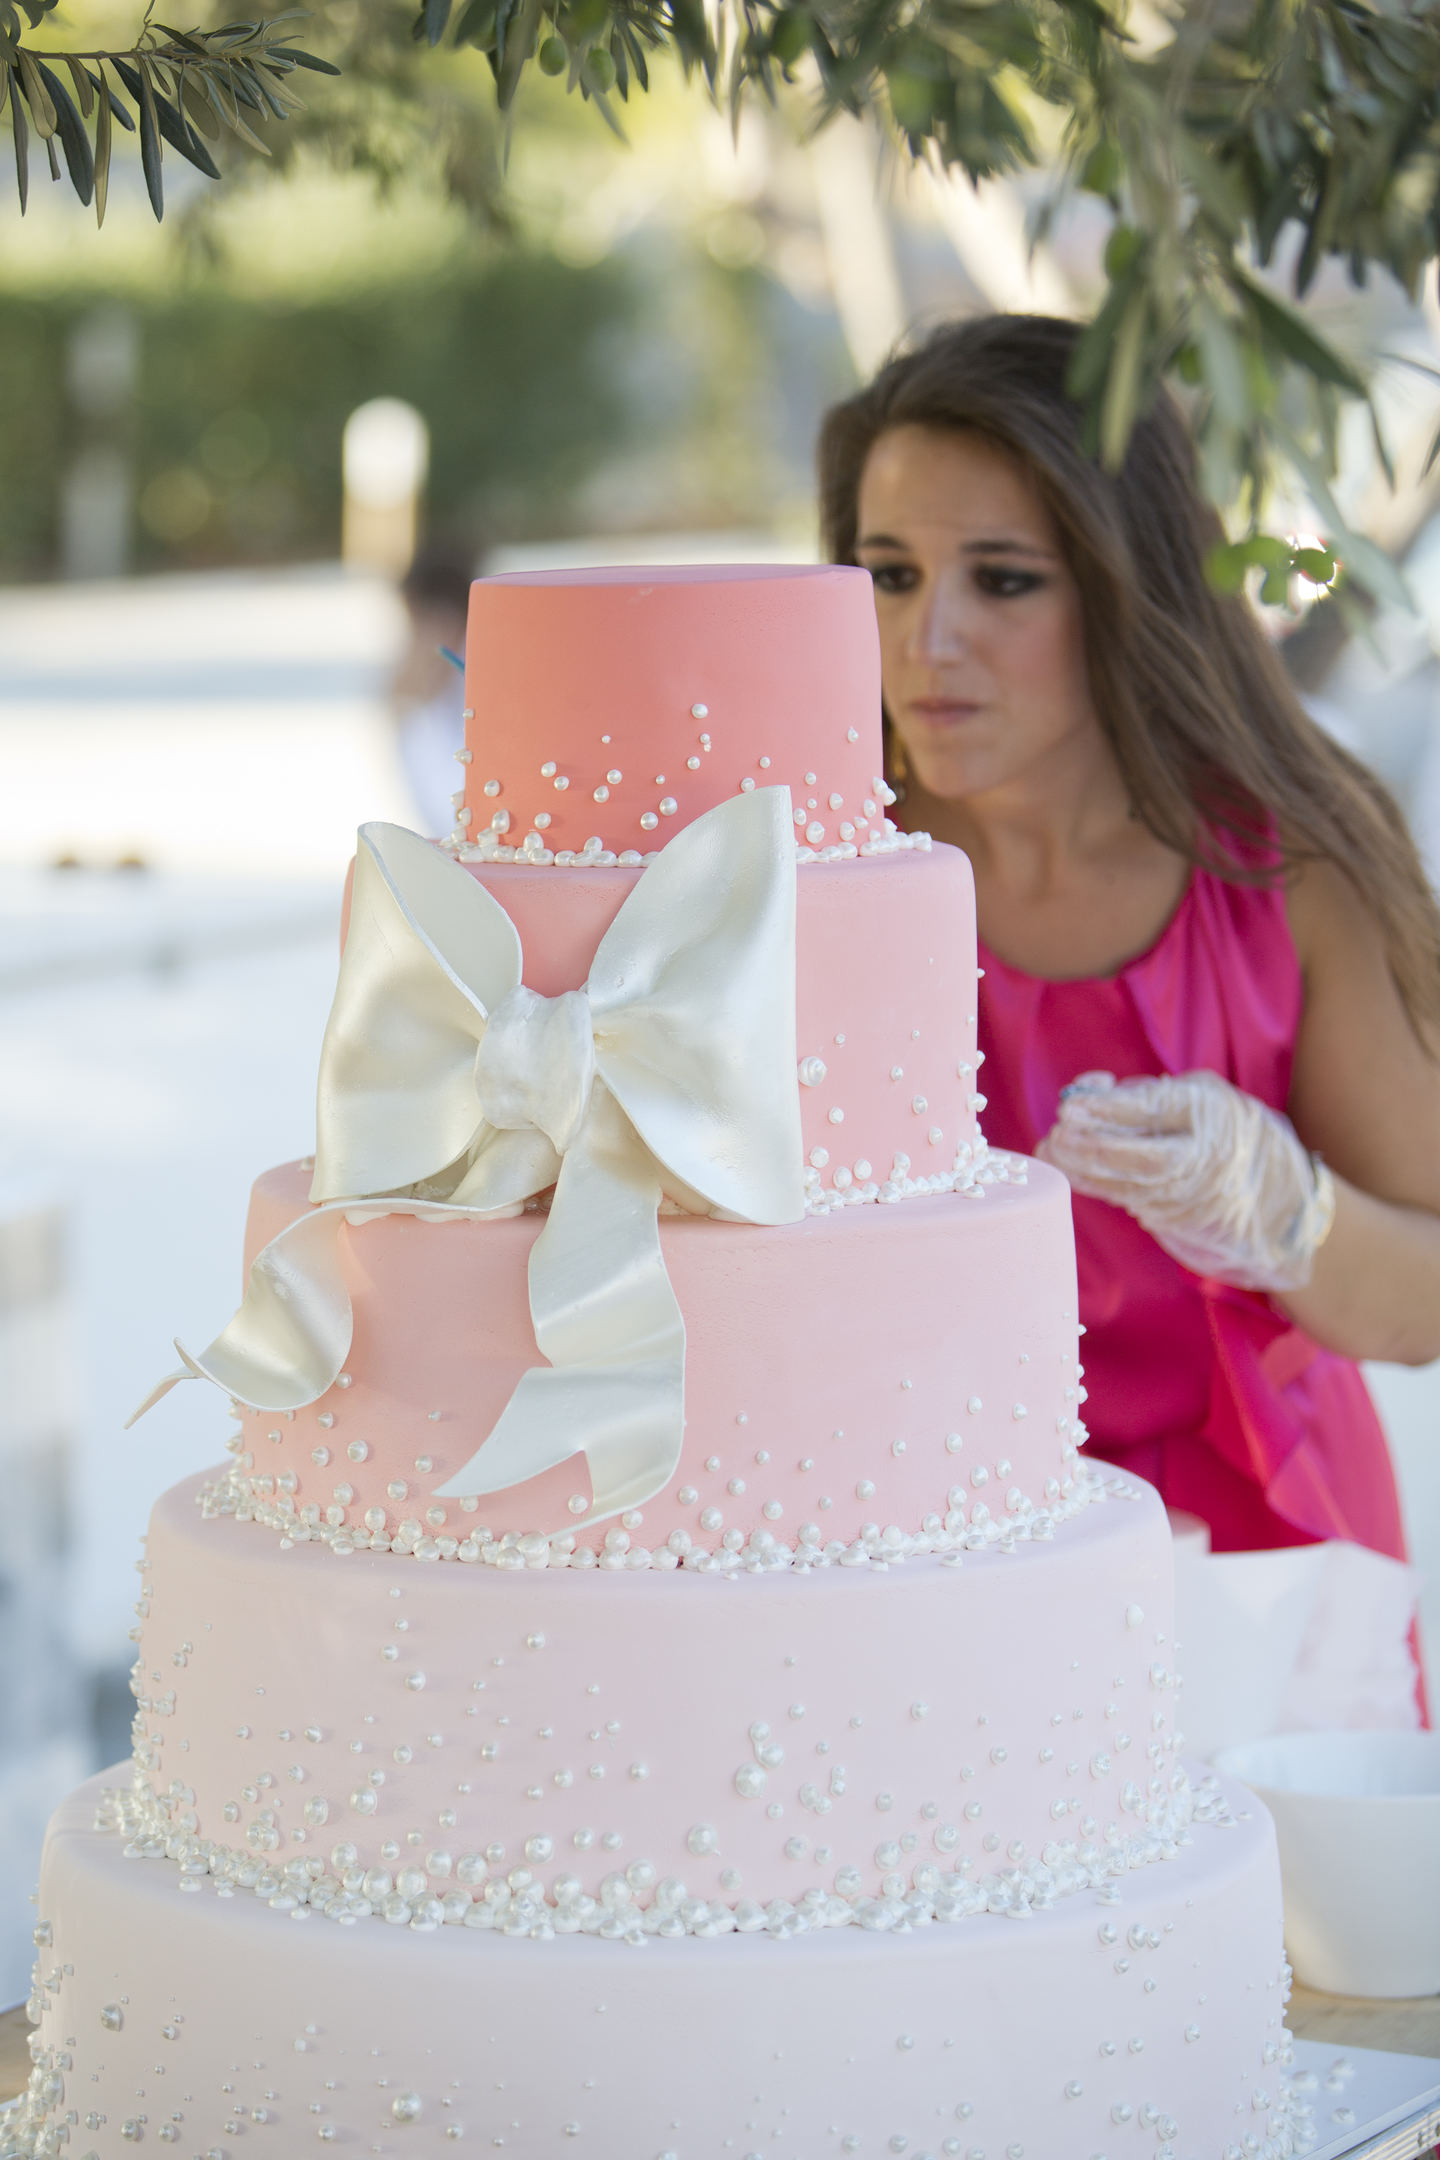 ZOE PUTTING THE LAST TOUCHES ON WEDDING CAKE (1)